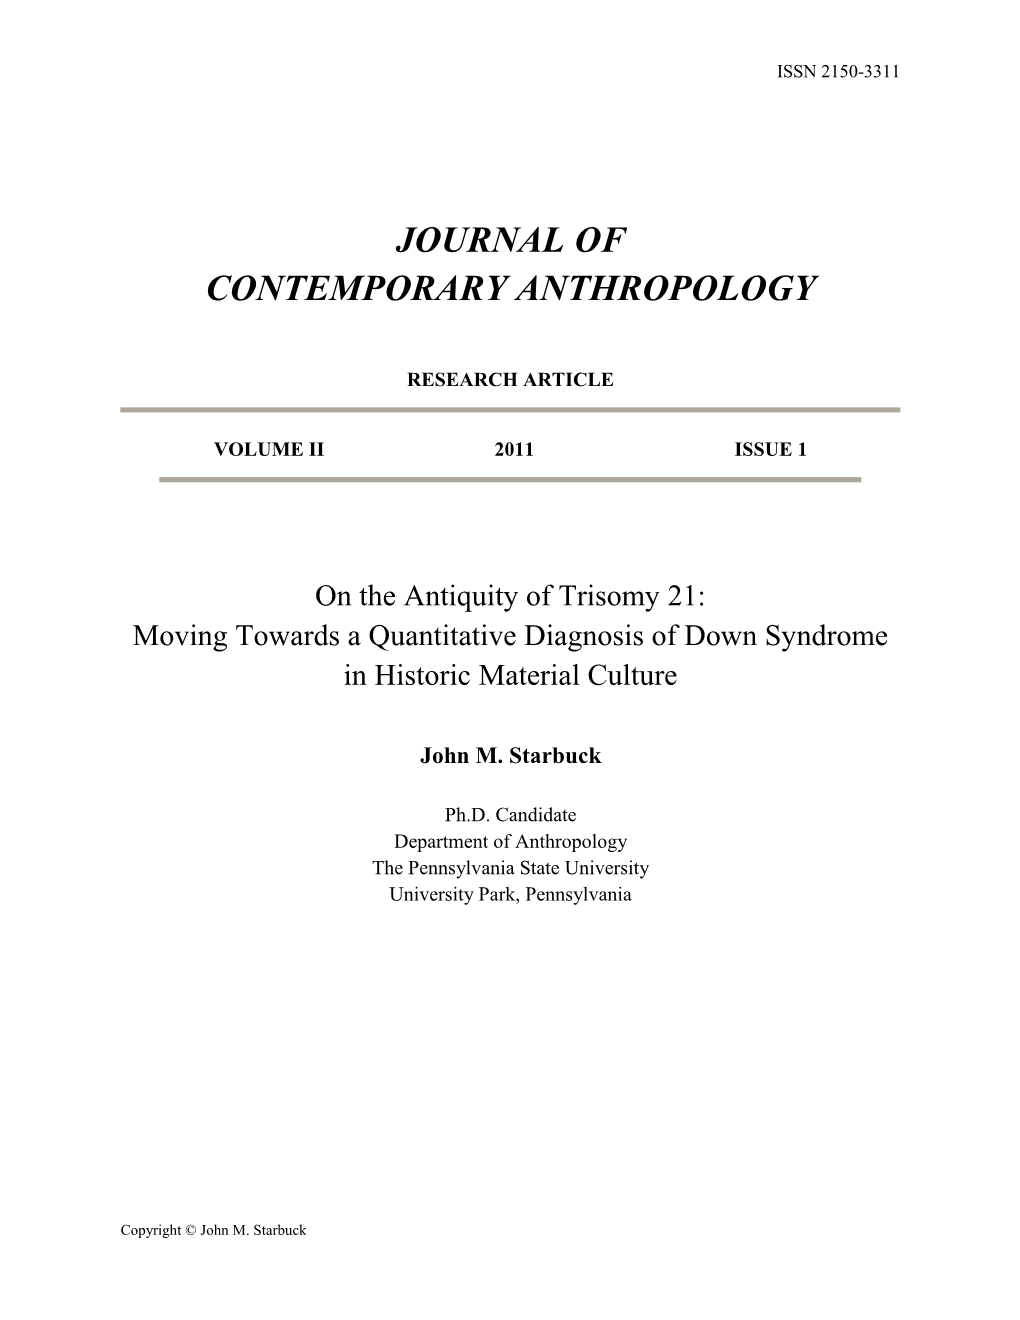 On the Antiquity of Trisomy 21: Moving Towards a Quantitative Diagnosis of Down Syndrome in Historic Material Culture